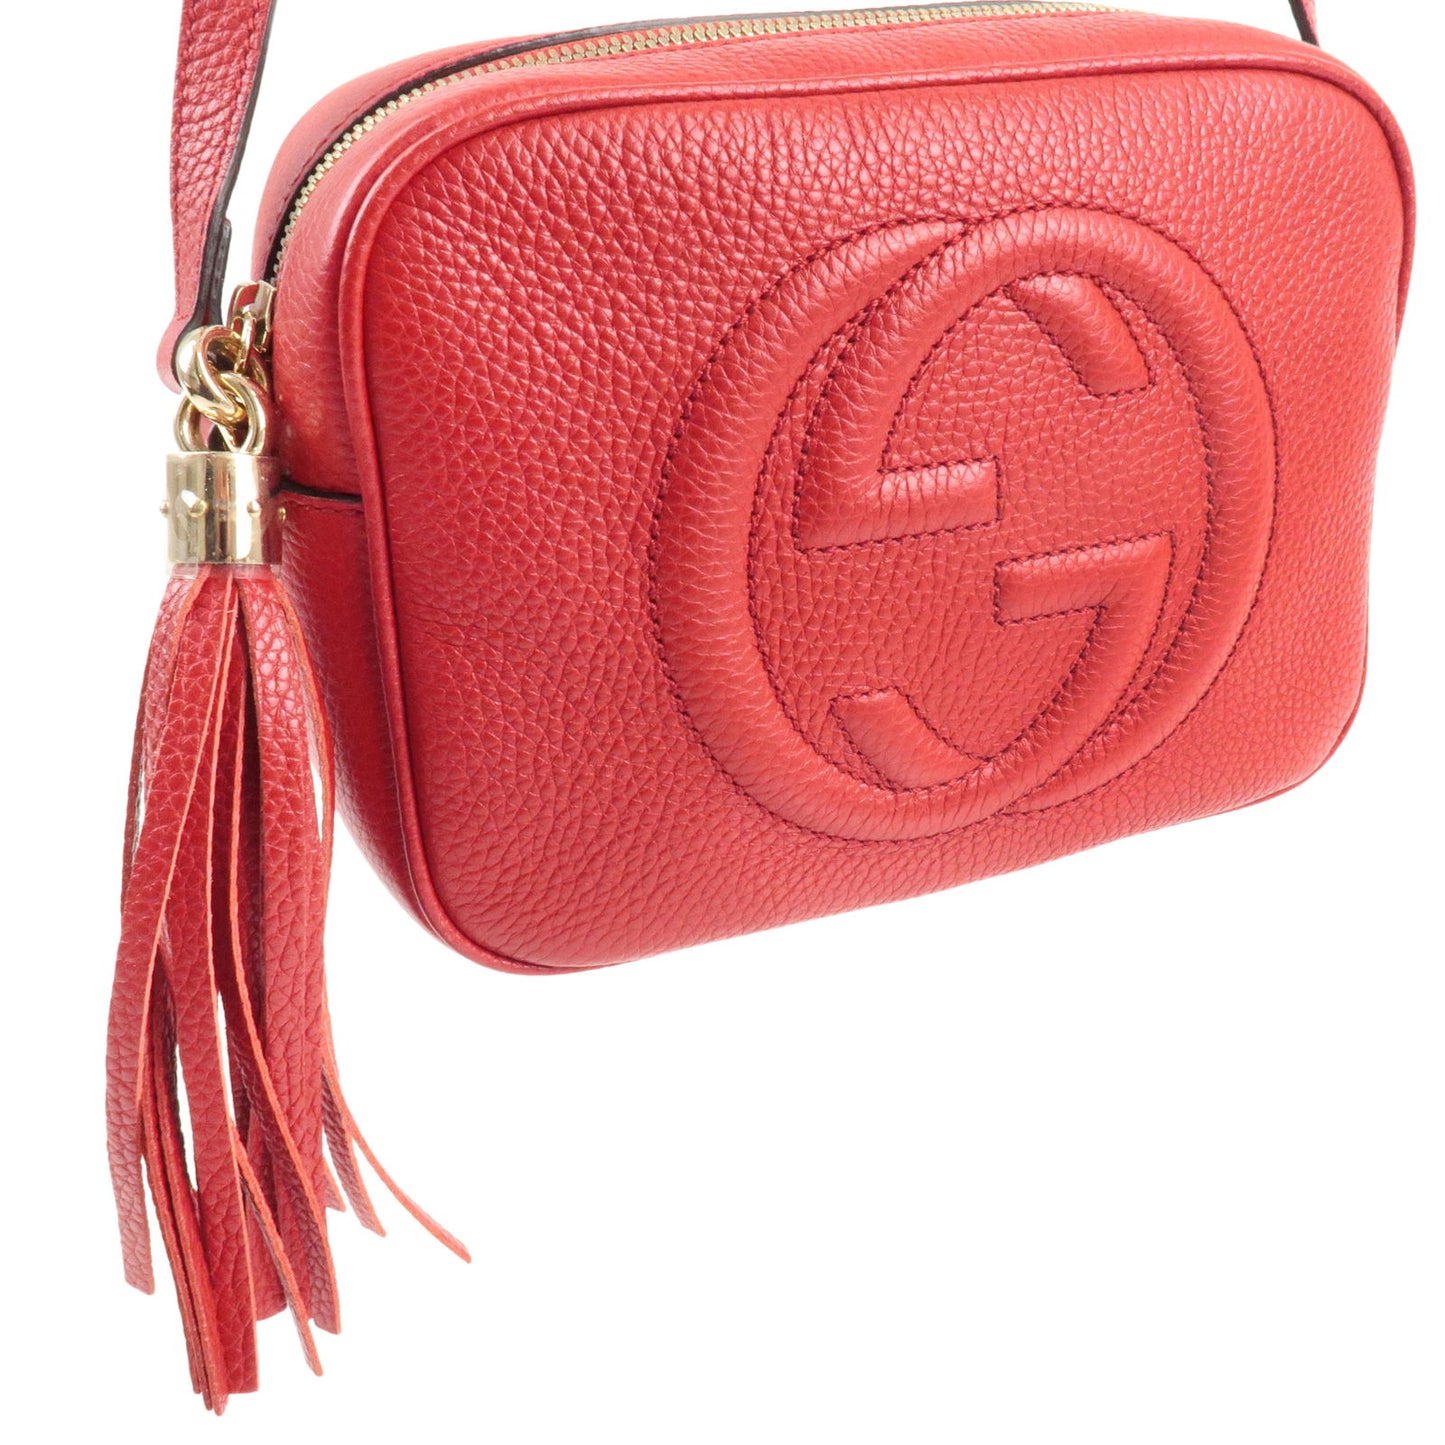 GUCCI SOHO Leather Small Disco Shoulder Bag Red 308364